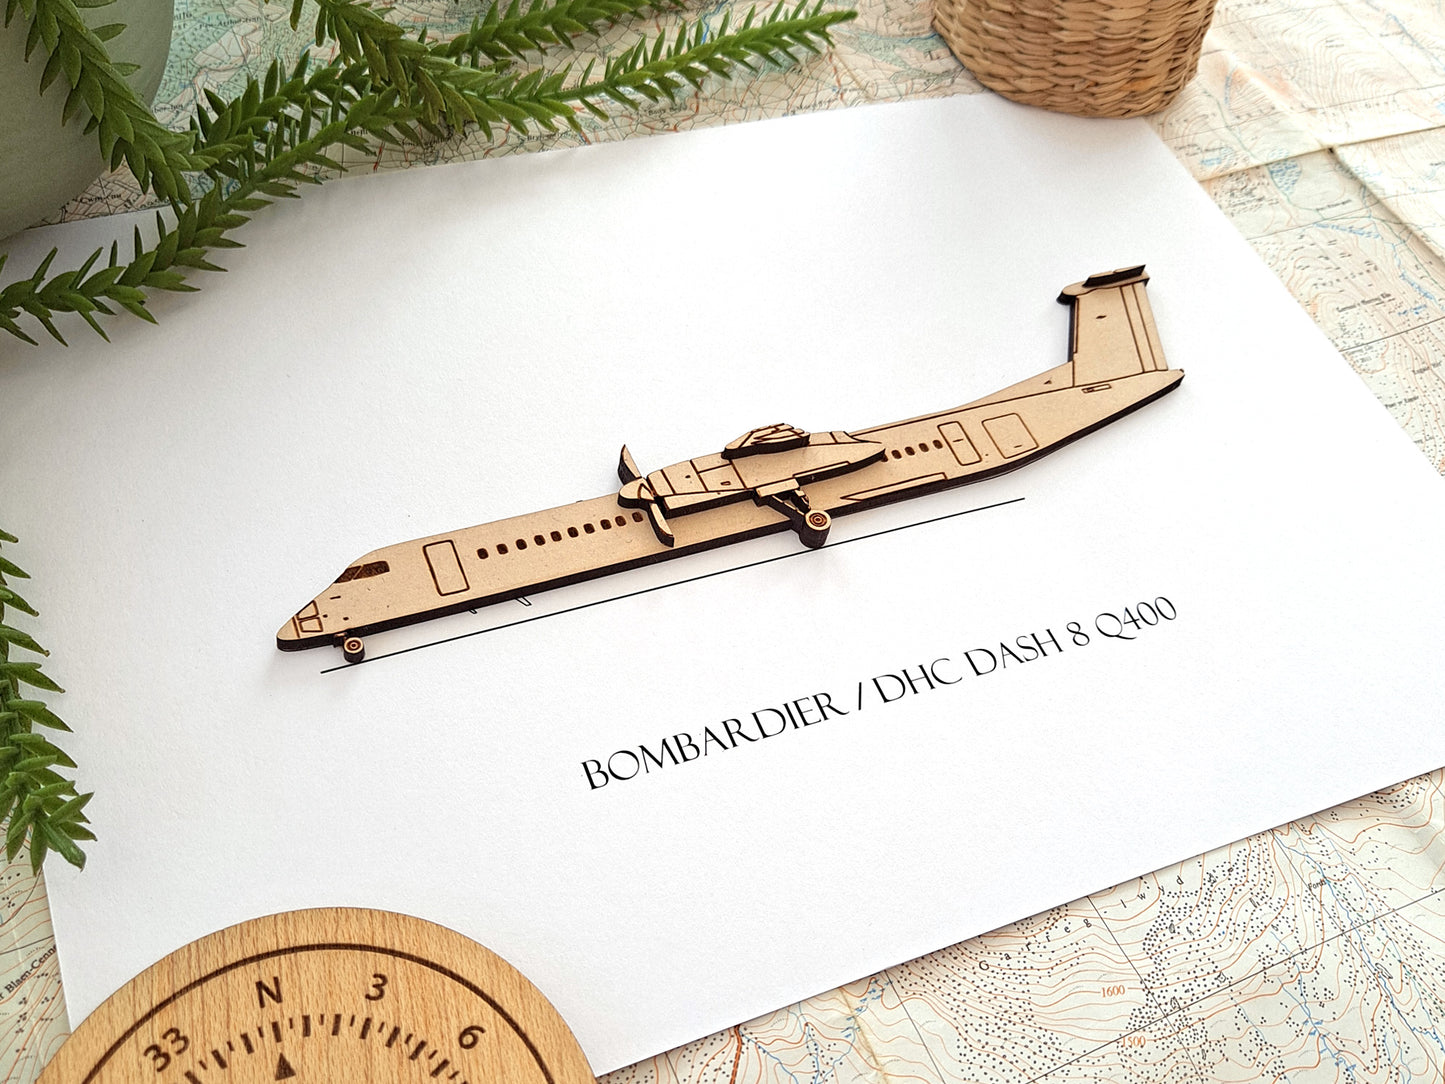 Bombardier DHC Dash 8 Q400 aviation gifts